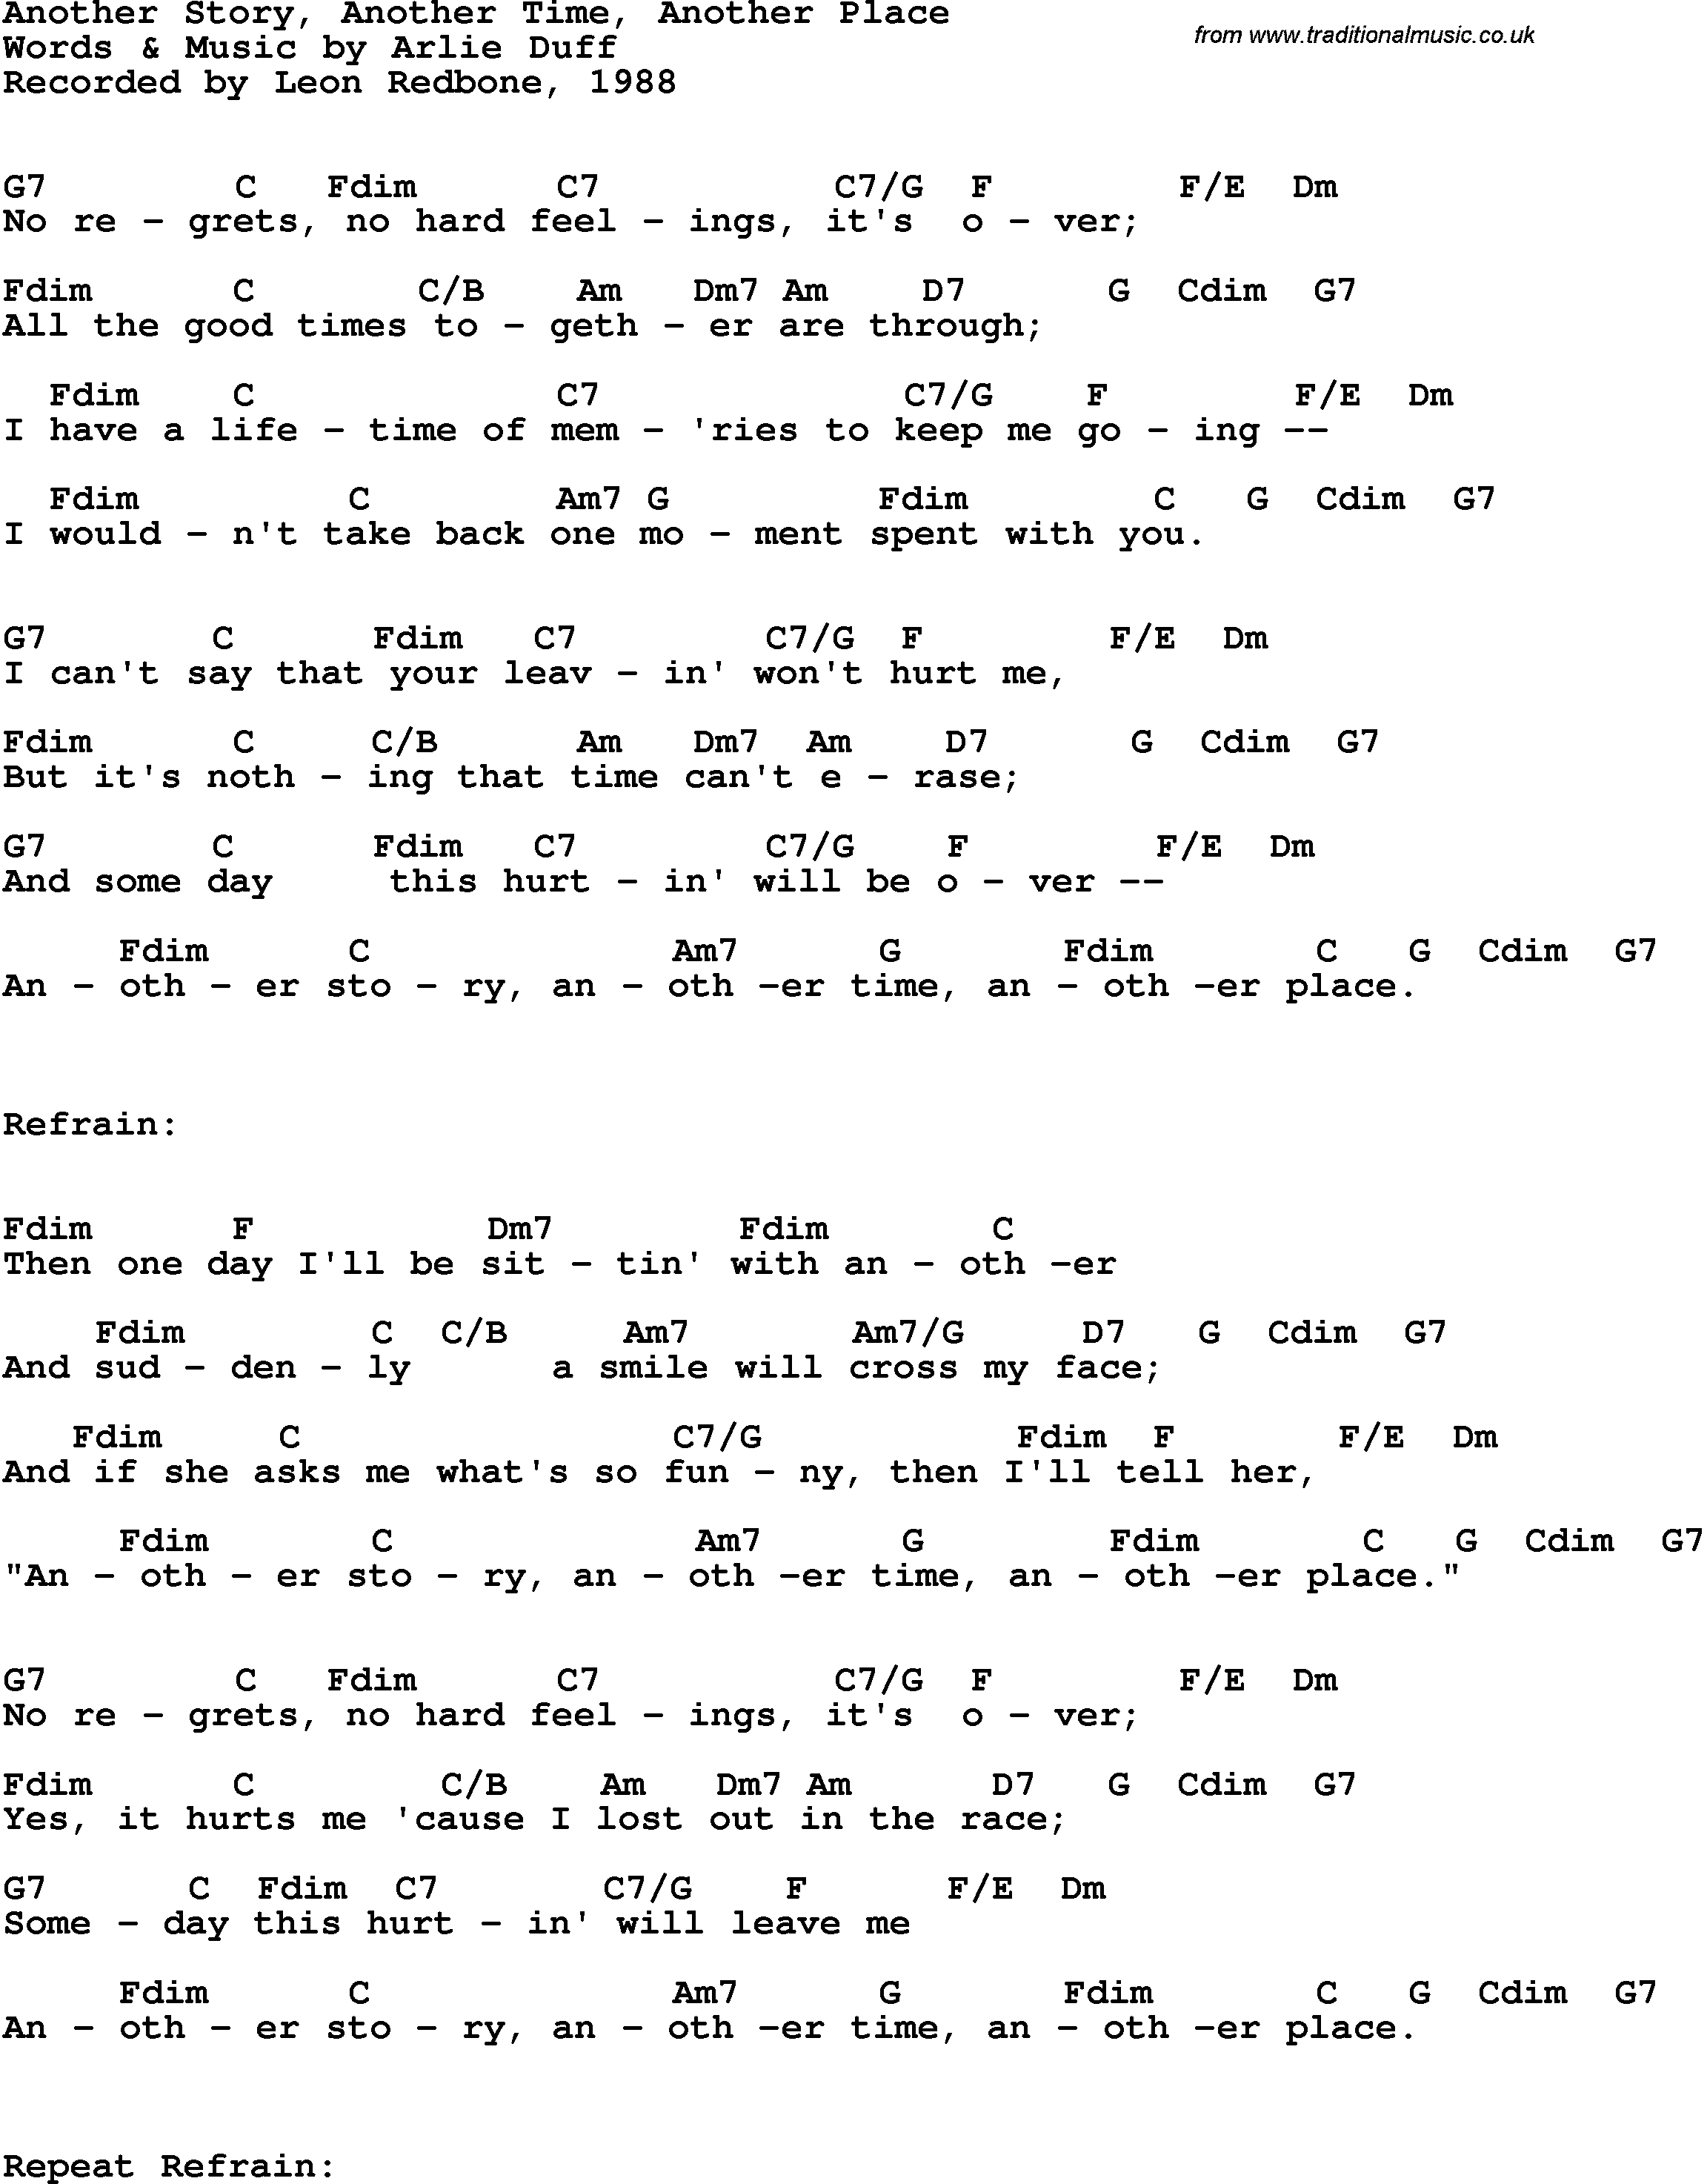 Song Lyrics with guitar chords for Another Story, Another Time, Another Place - Leon Redbone, 1988